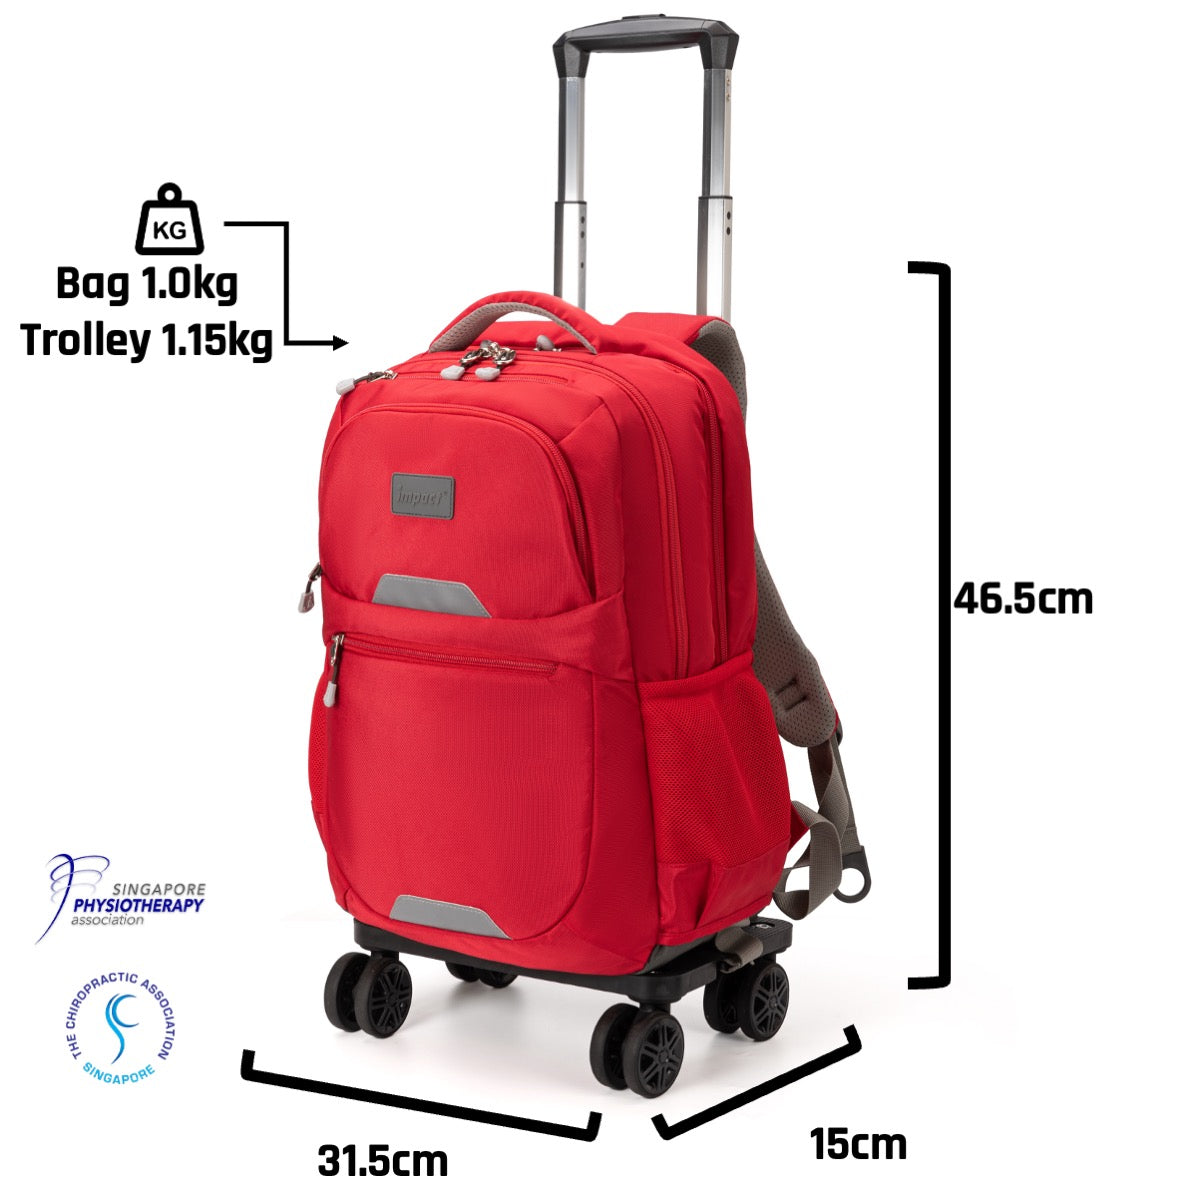 Impact School Bag IP-2300 - Ergo-Comfort Spinal Support Detachable Trolley Backpack